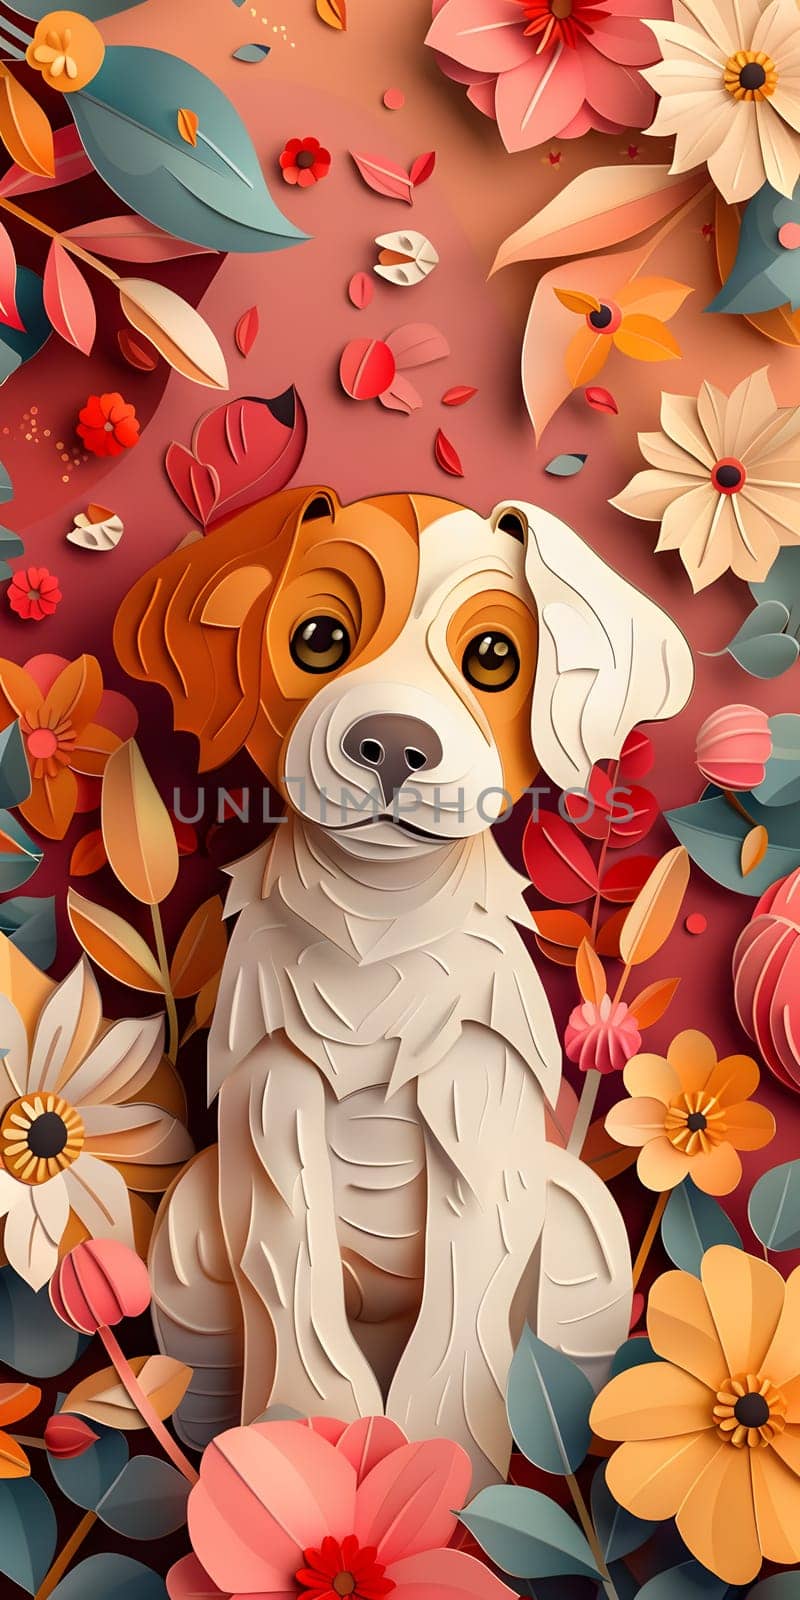 A fawncolored Labrador Retriever, a carnivore and companion dog breed, is peacefully sitting among colorful flowers and leaves, creating a picturesque scene fit for a painting